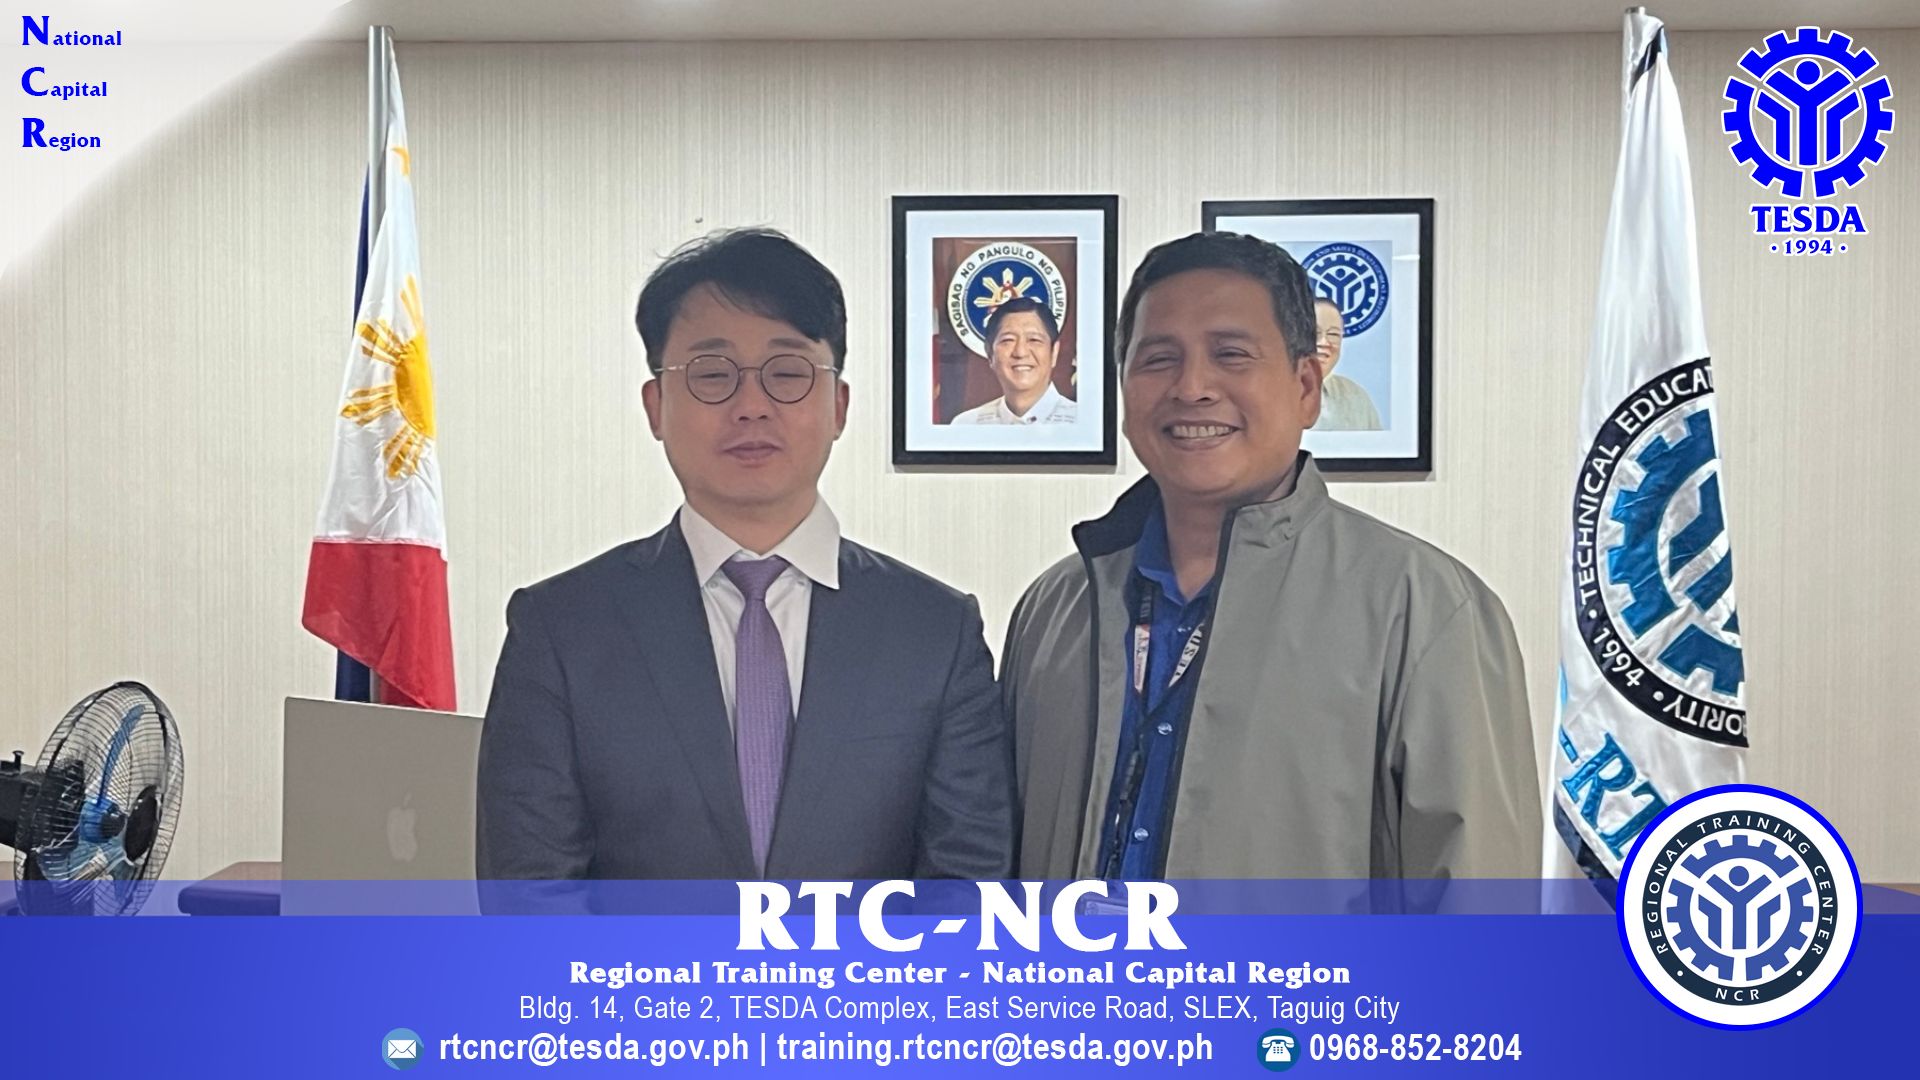 Partnership exploratory meeting with Metavity took place on Feb 22, 2023, at the RTC-NCR Office.